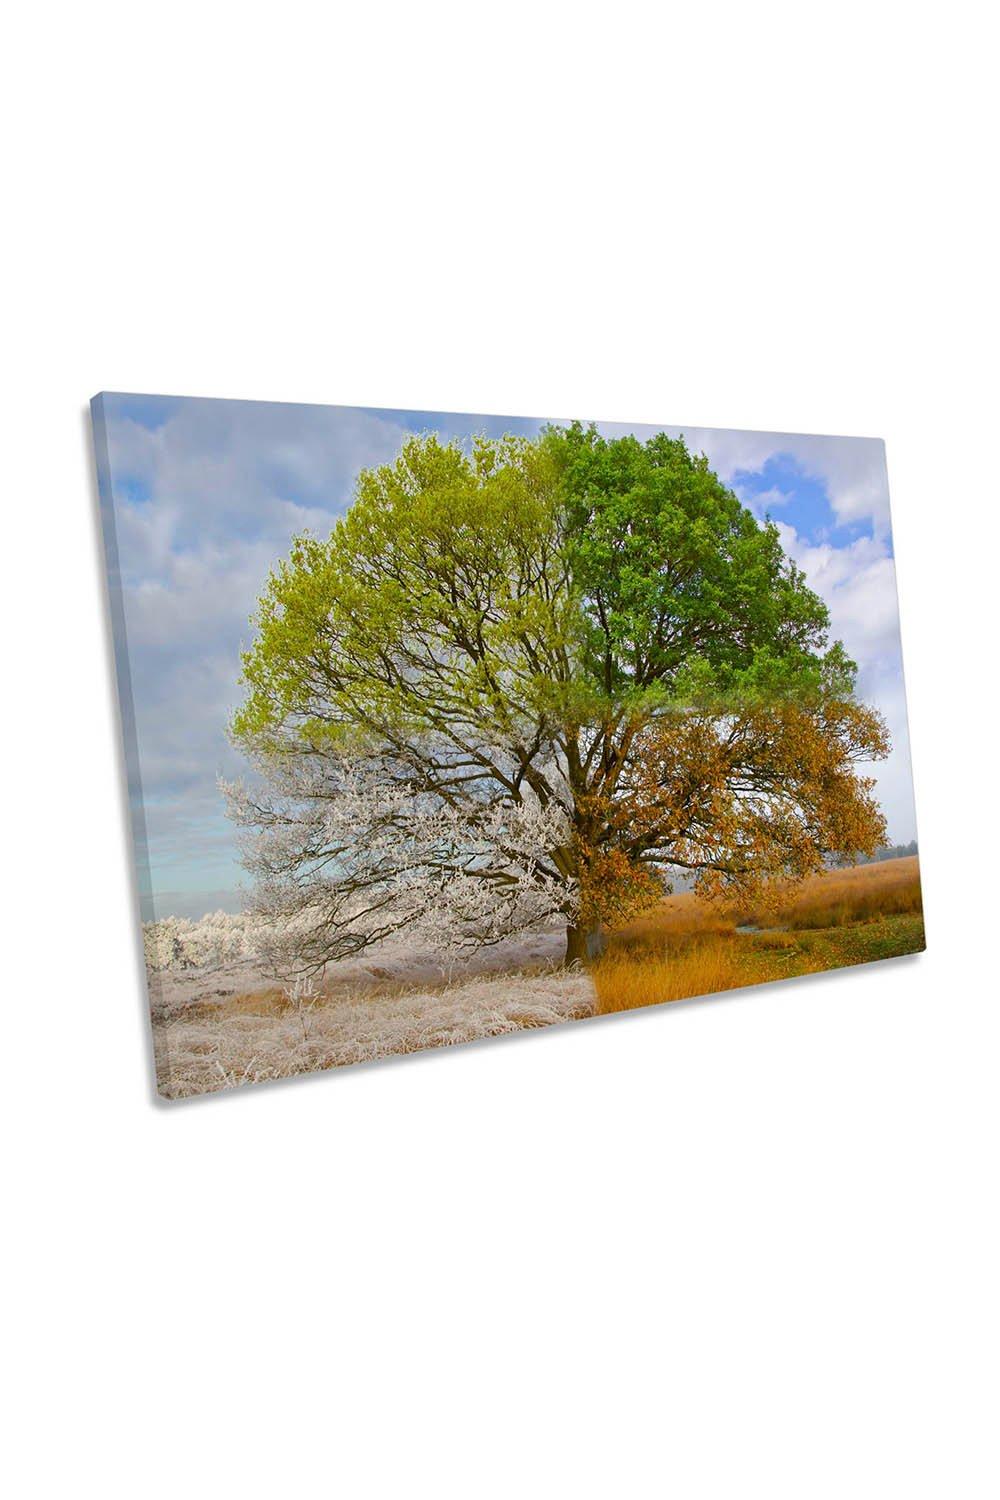 Oak Tree in Four Seasons Floral Canvas Wall Art Picture Print